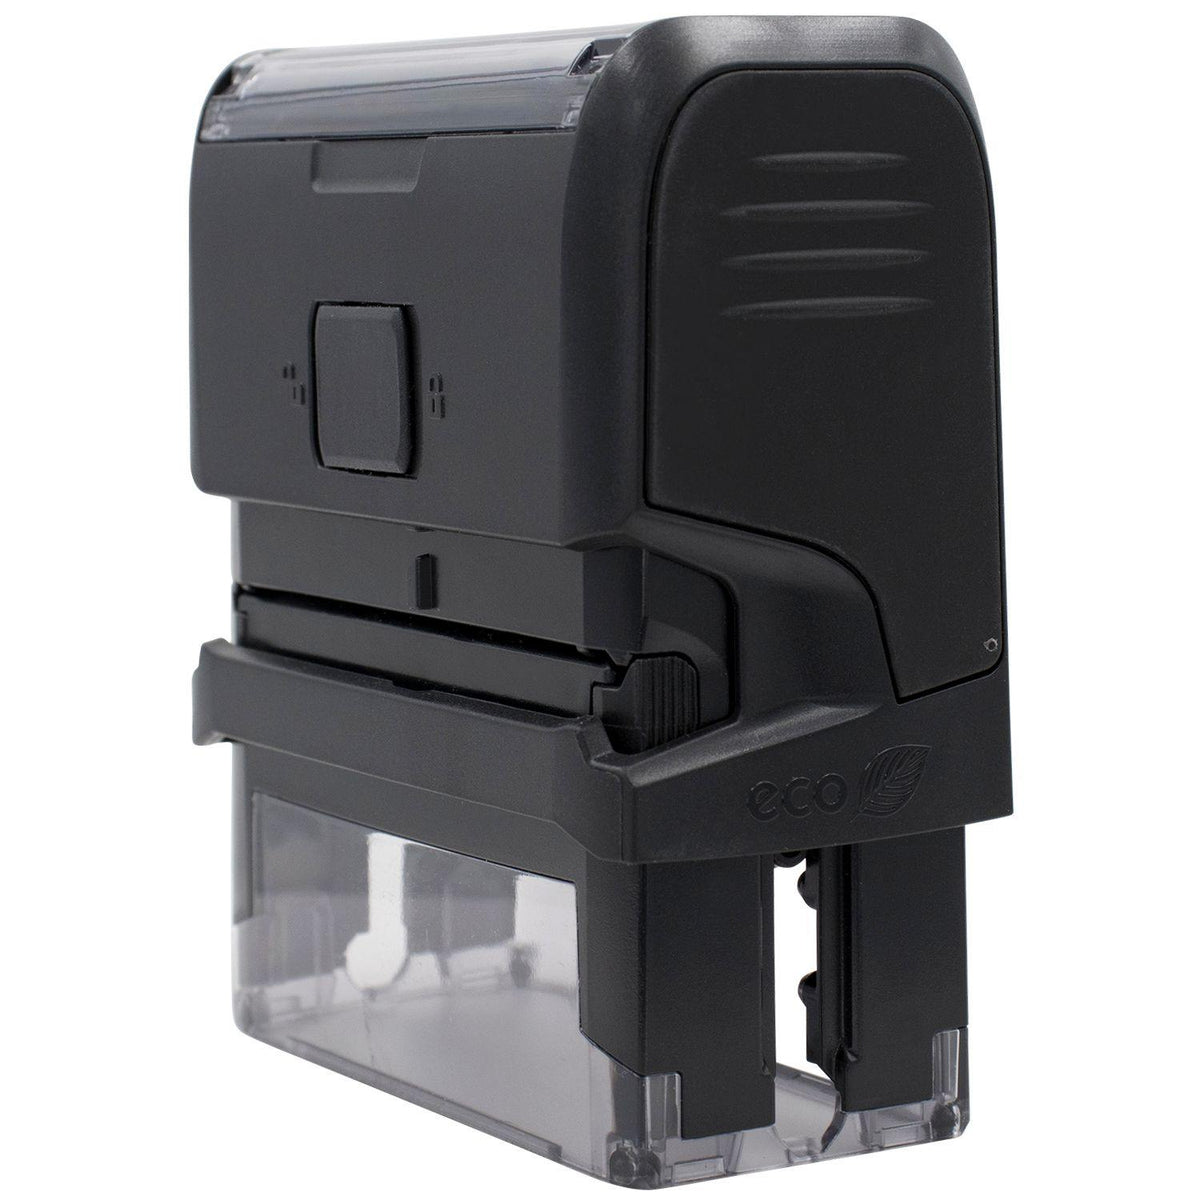 Self Inking Discharge Stamp - Engineer Seal Stamps - Brand_Trodat, Impression Size_Small, Stamp Type_Self-Inking Stamp, Type of Use_Medical Office